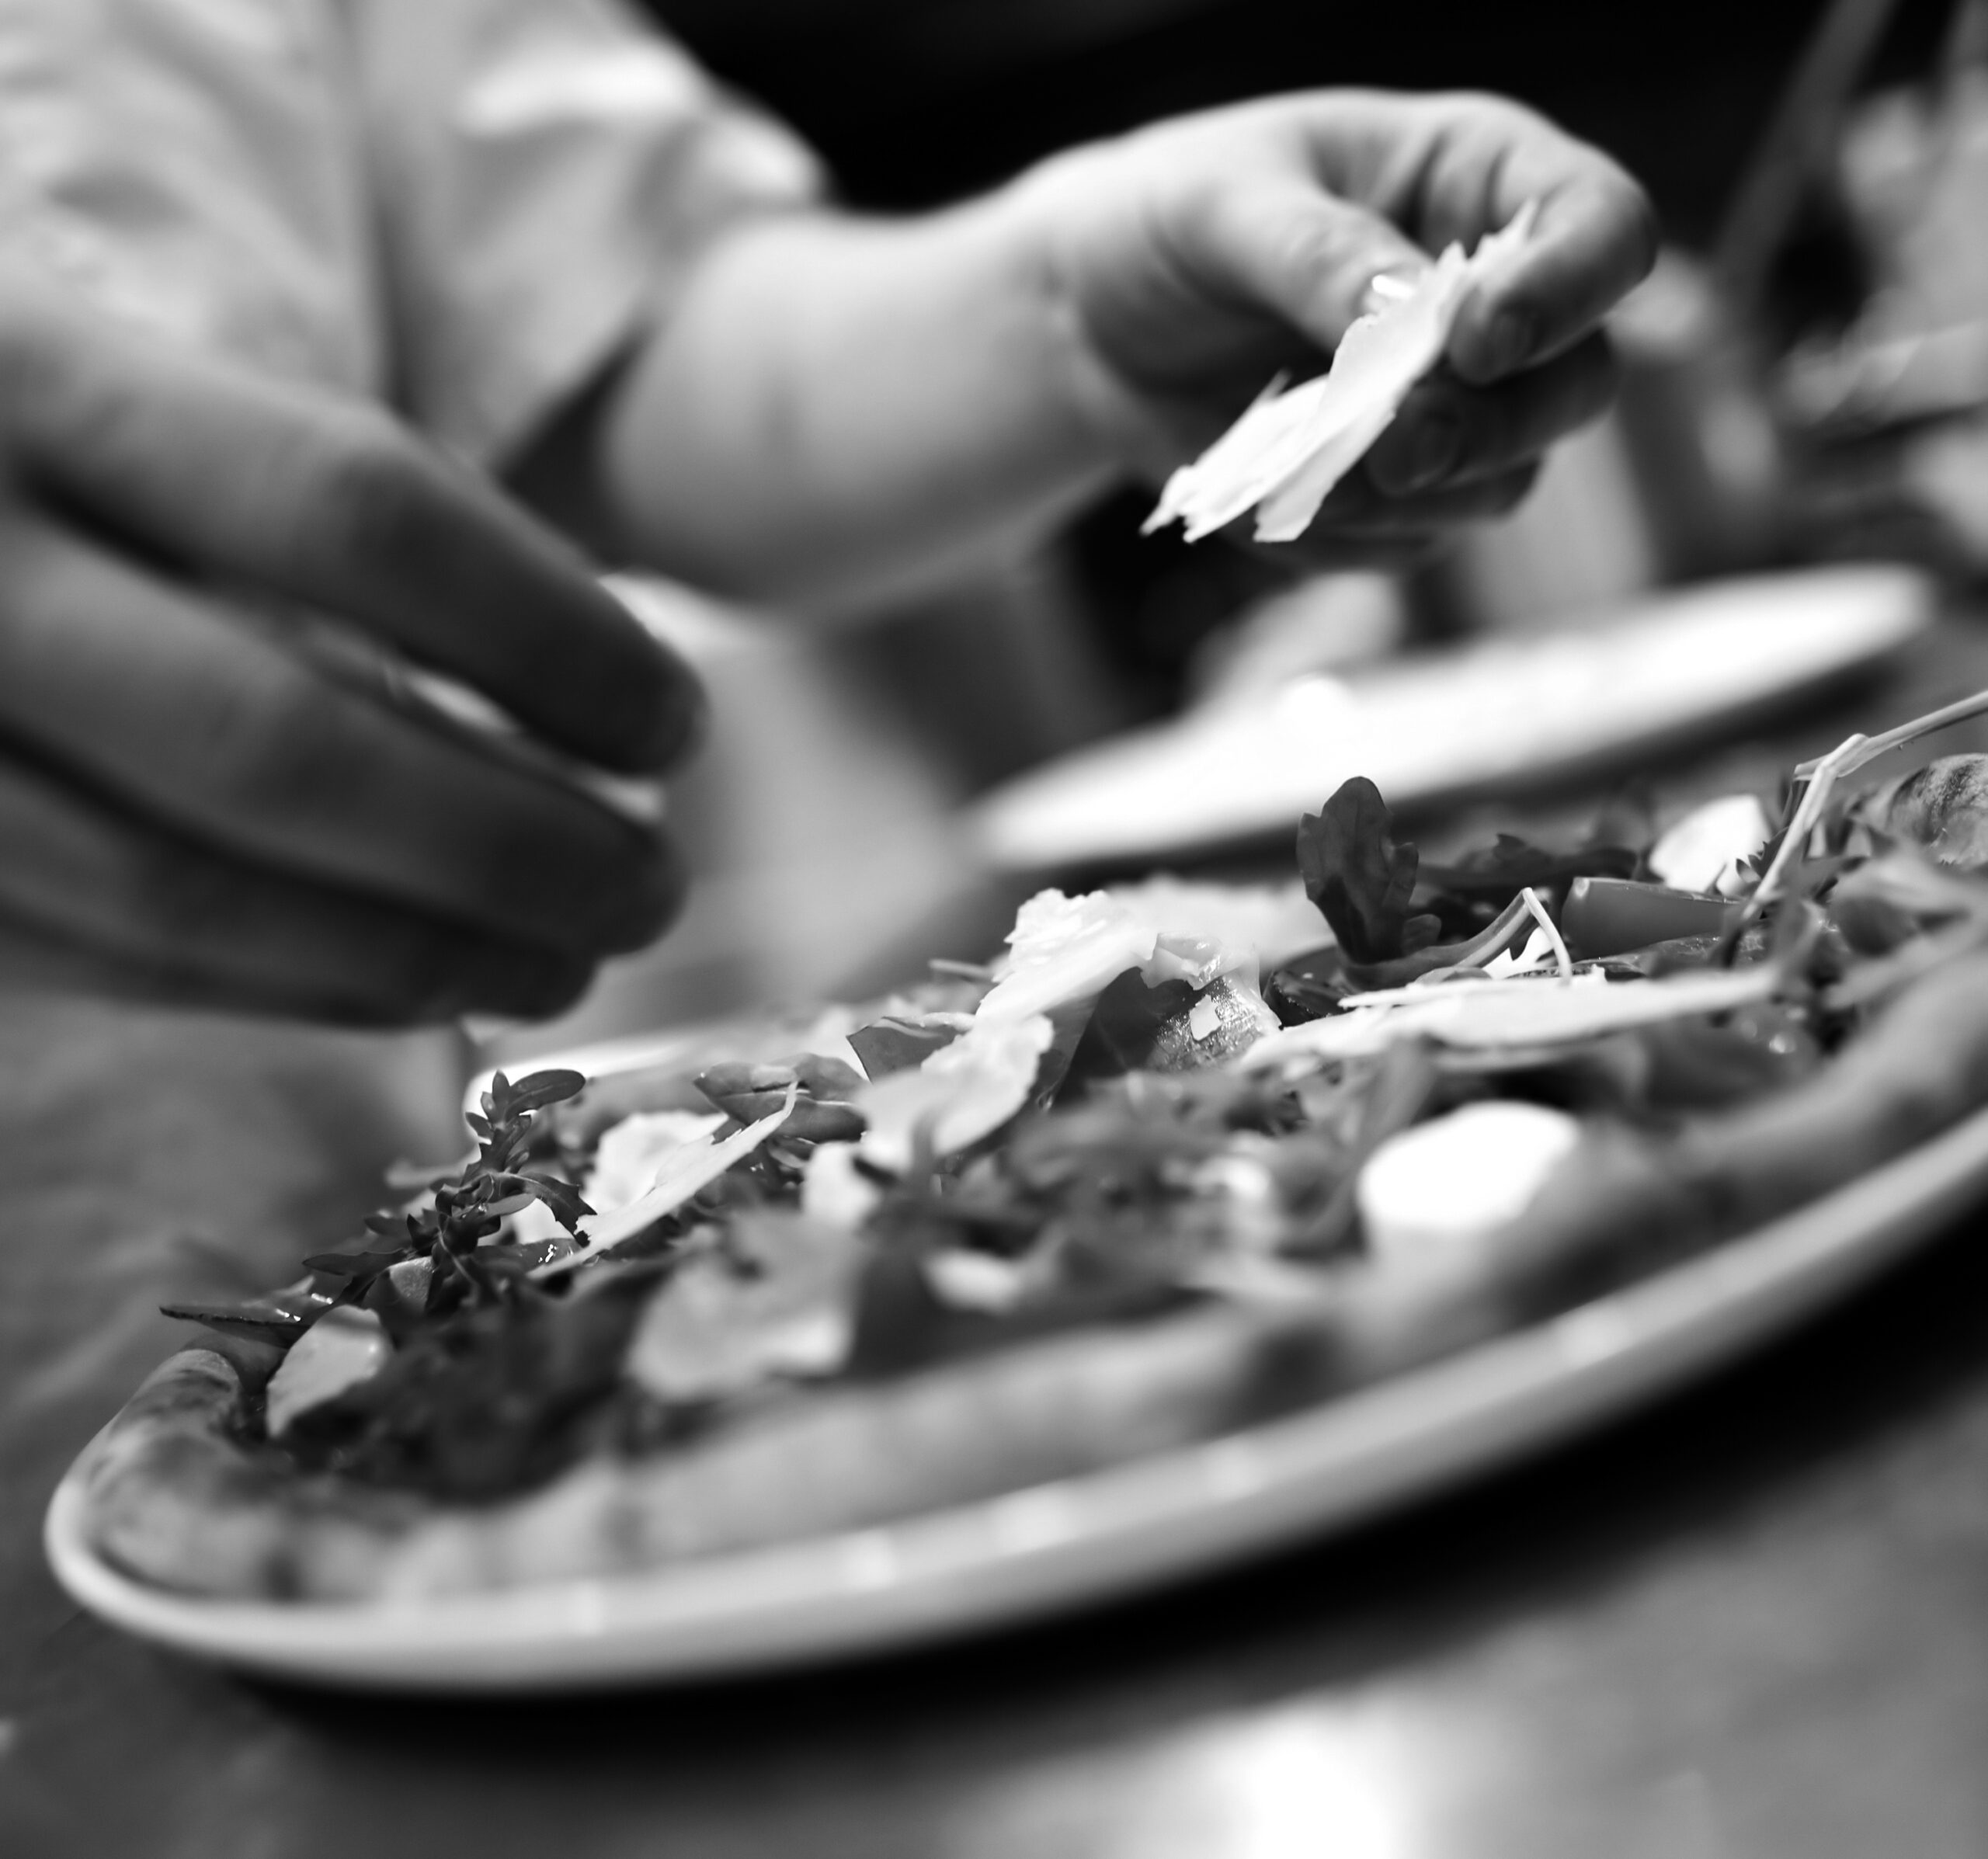 Closeup,Hand,Of,Chef,Baker,In,White,Uniform,Making,Pizza